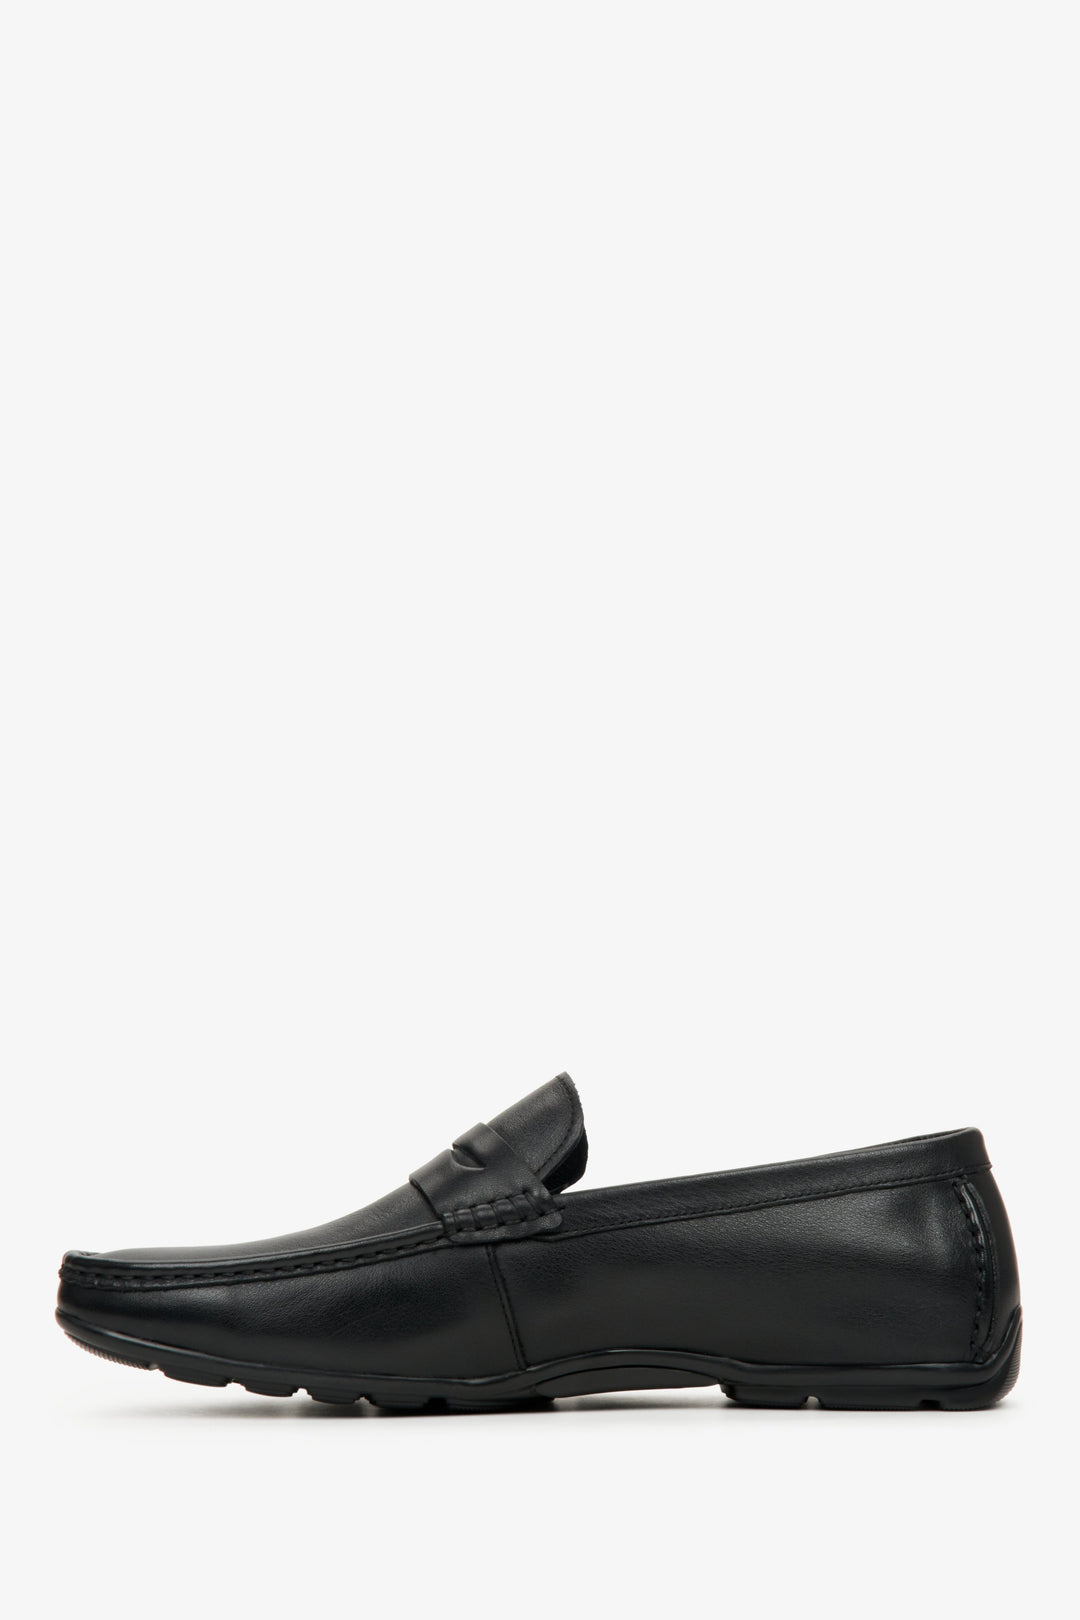 Men's black leather loafers for spring and autumn - shoe profile presentation.